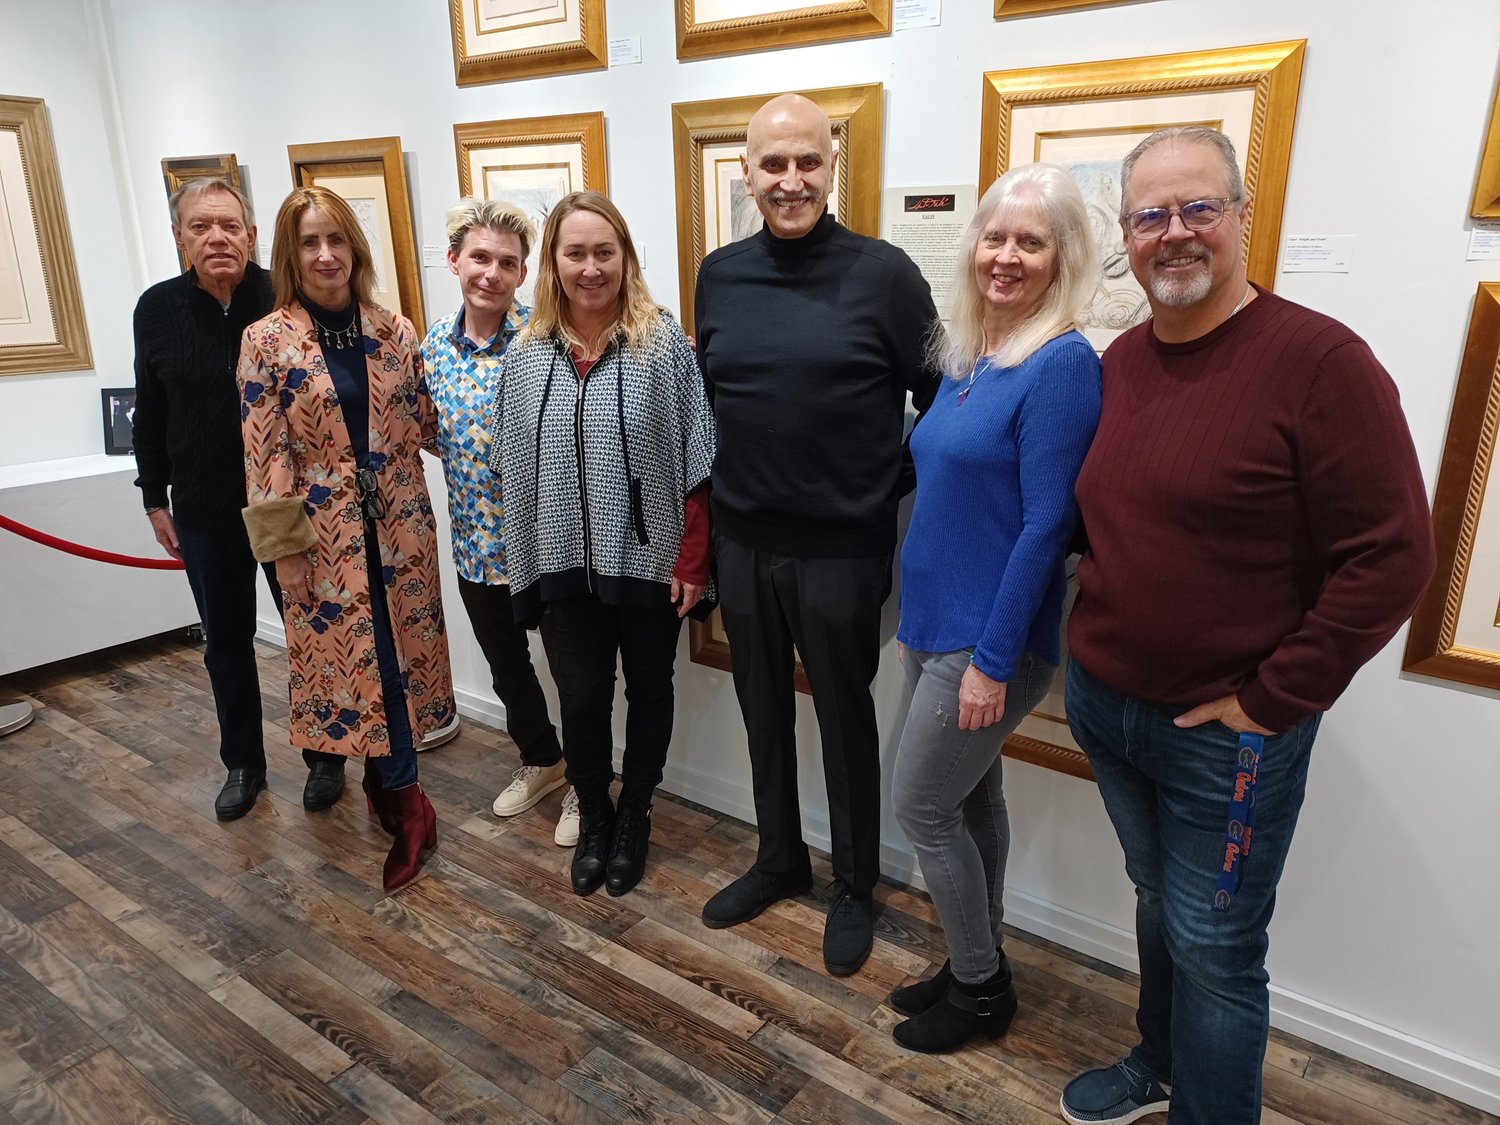 Gathered at Gallery 725 during the opening reception of “Dali: The Argillet Collection” on Jan. 28 are, from left, Mike Turnage, Cynthia Turnage, Matt Winghart, Shayna Winghart, Nim Vaswani, Marci Connelly and Chris Connelly.